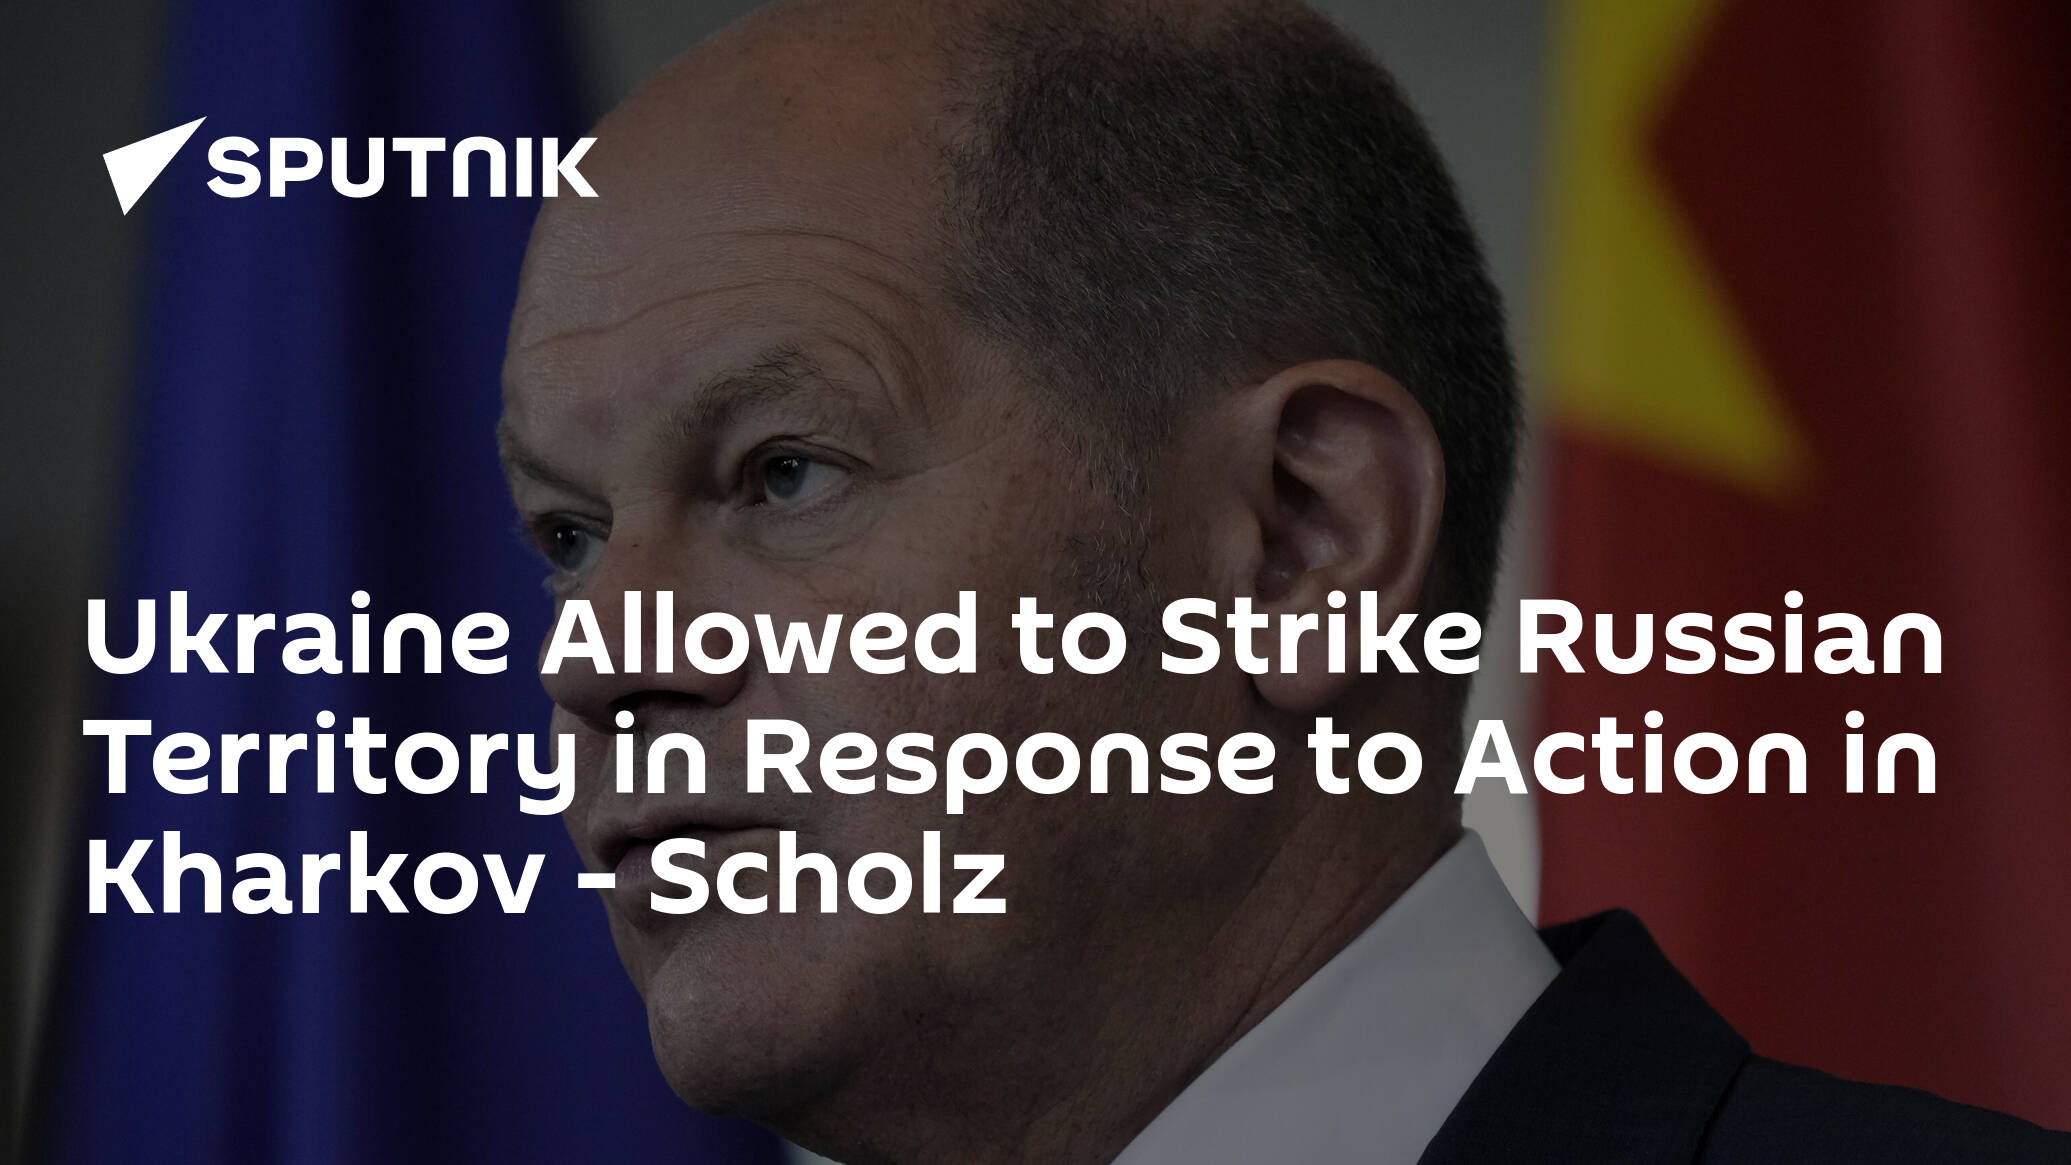 Scholz Greenlights German-Supplied Weapons for Ukrainian Strikes on Russia From Kharkov